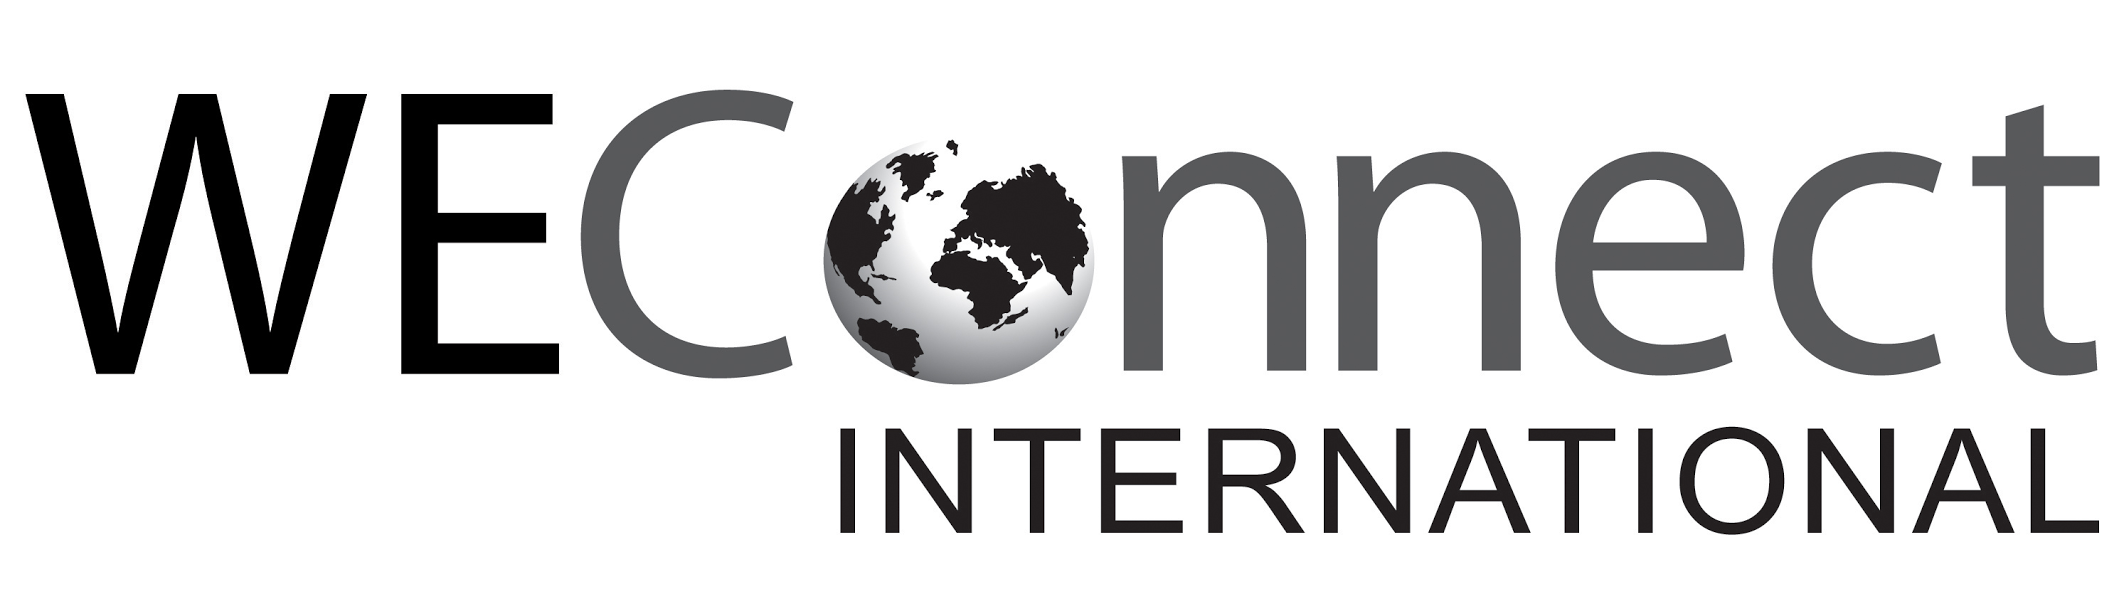 we_connect_logo